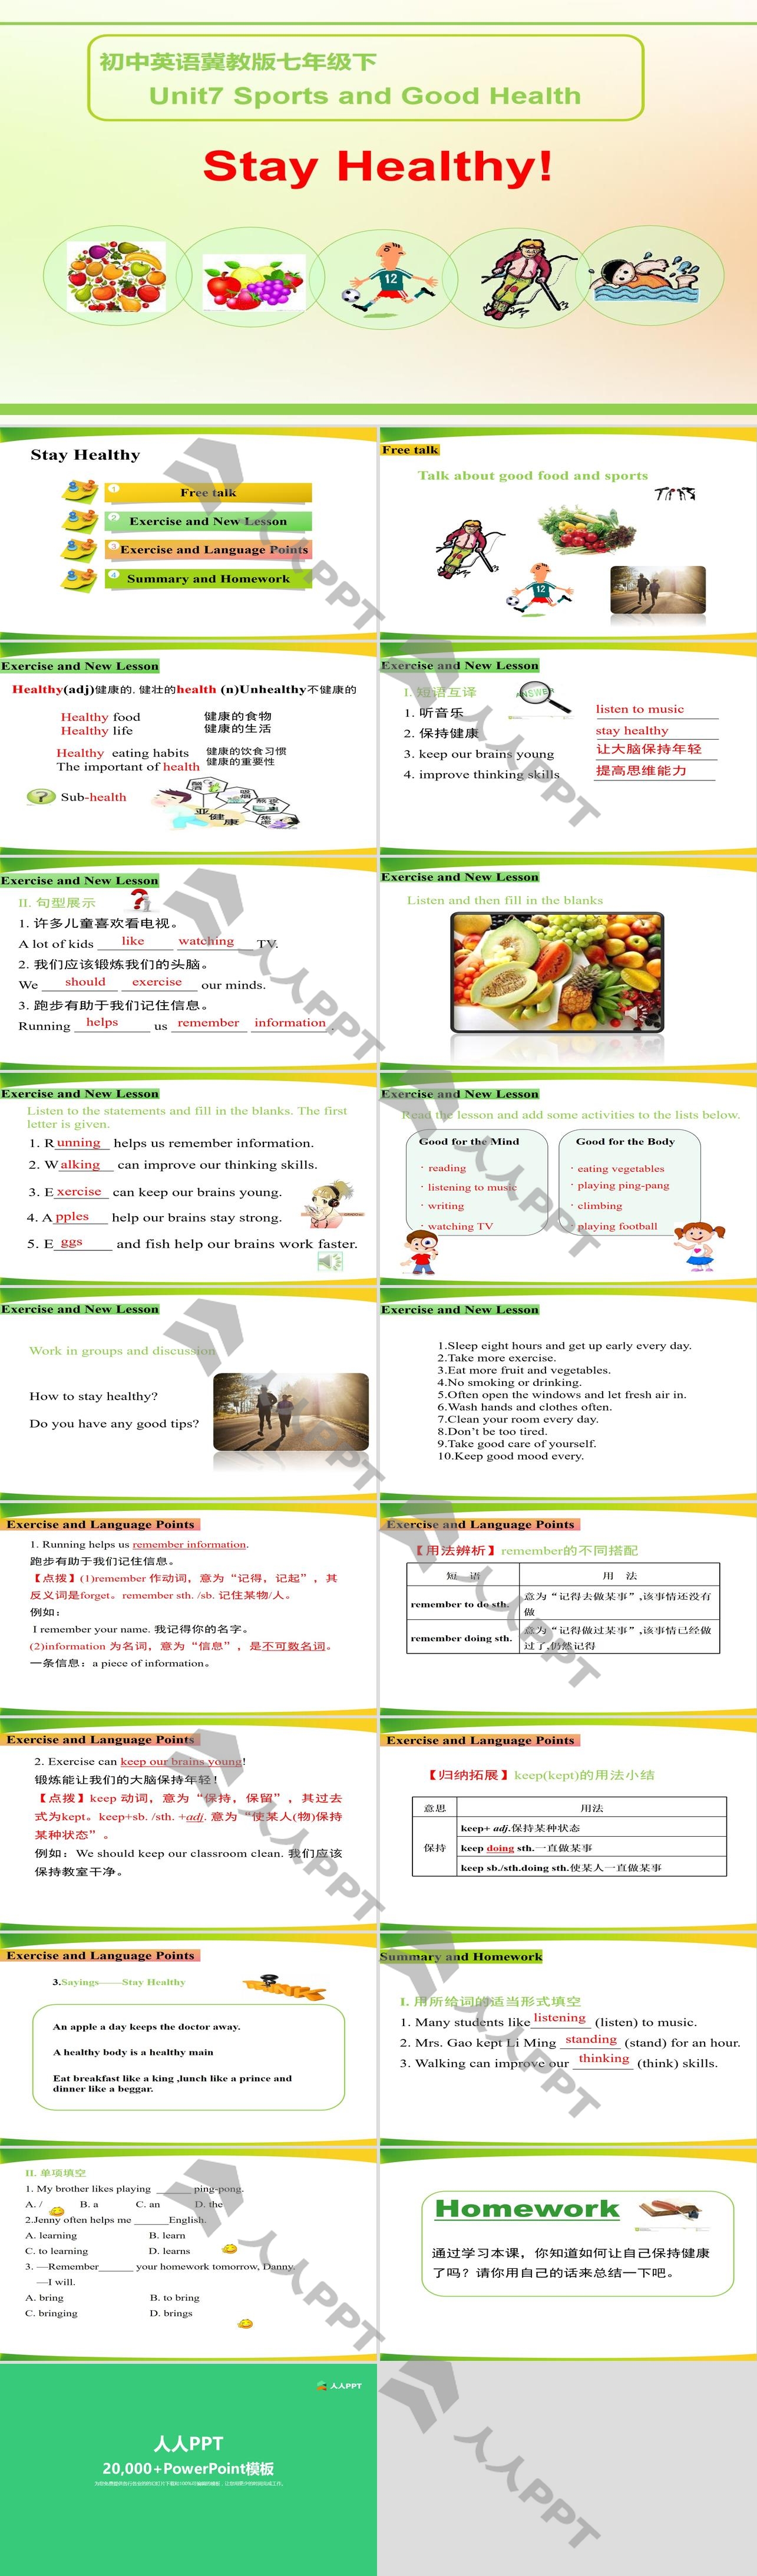 《Stay Healthy!》Sports and Good Health PPT长图